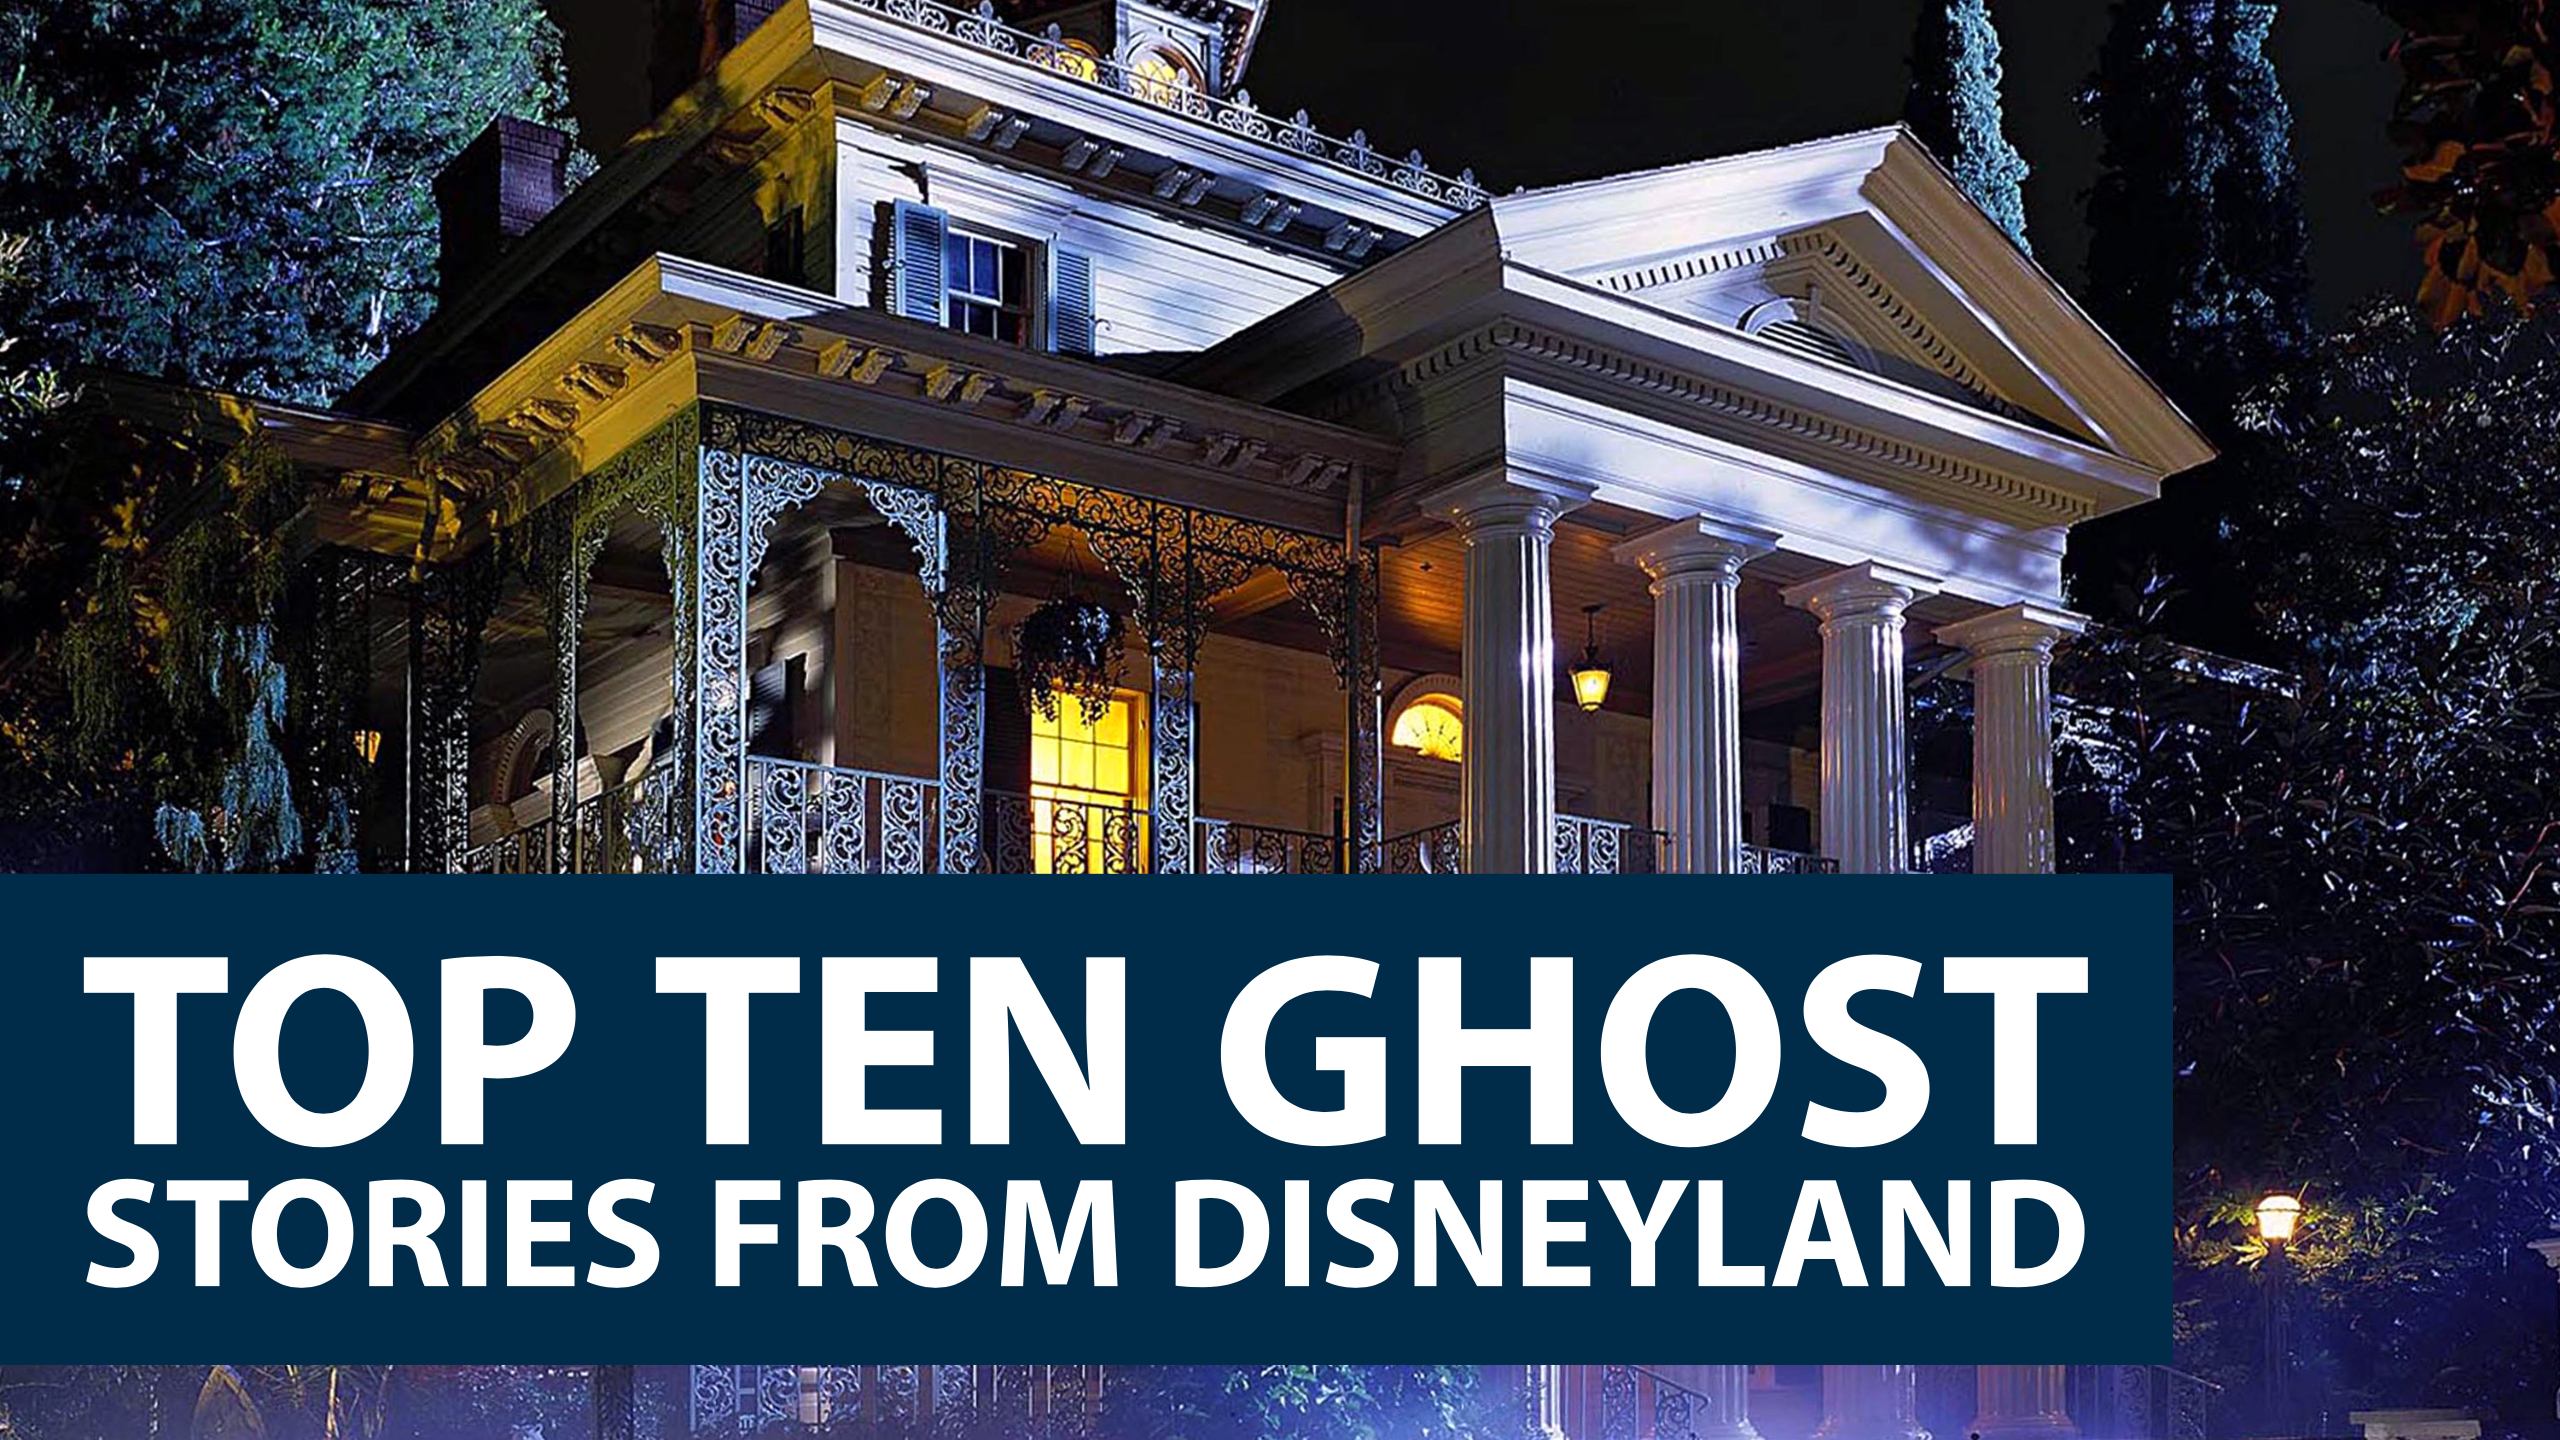 More Than A Haunted Mansion – The Top Ten Ghost Stories from Disneyland!